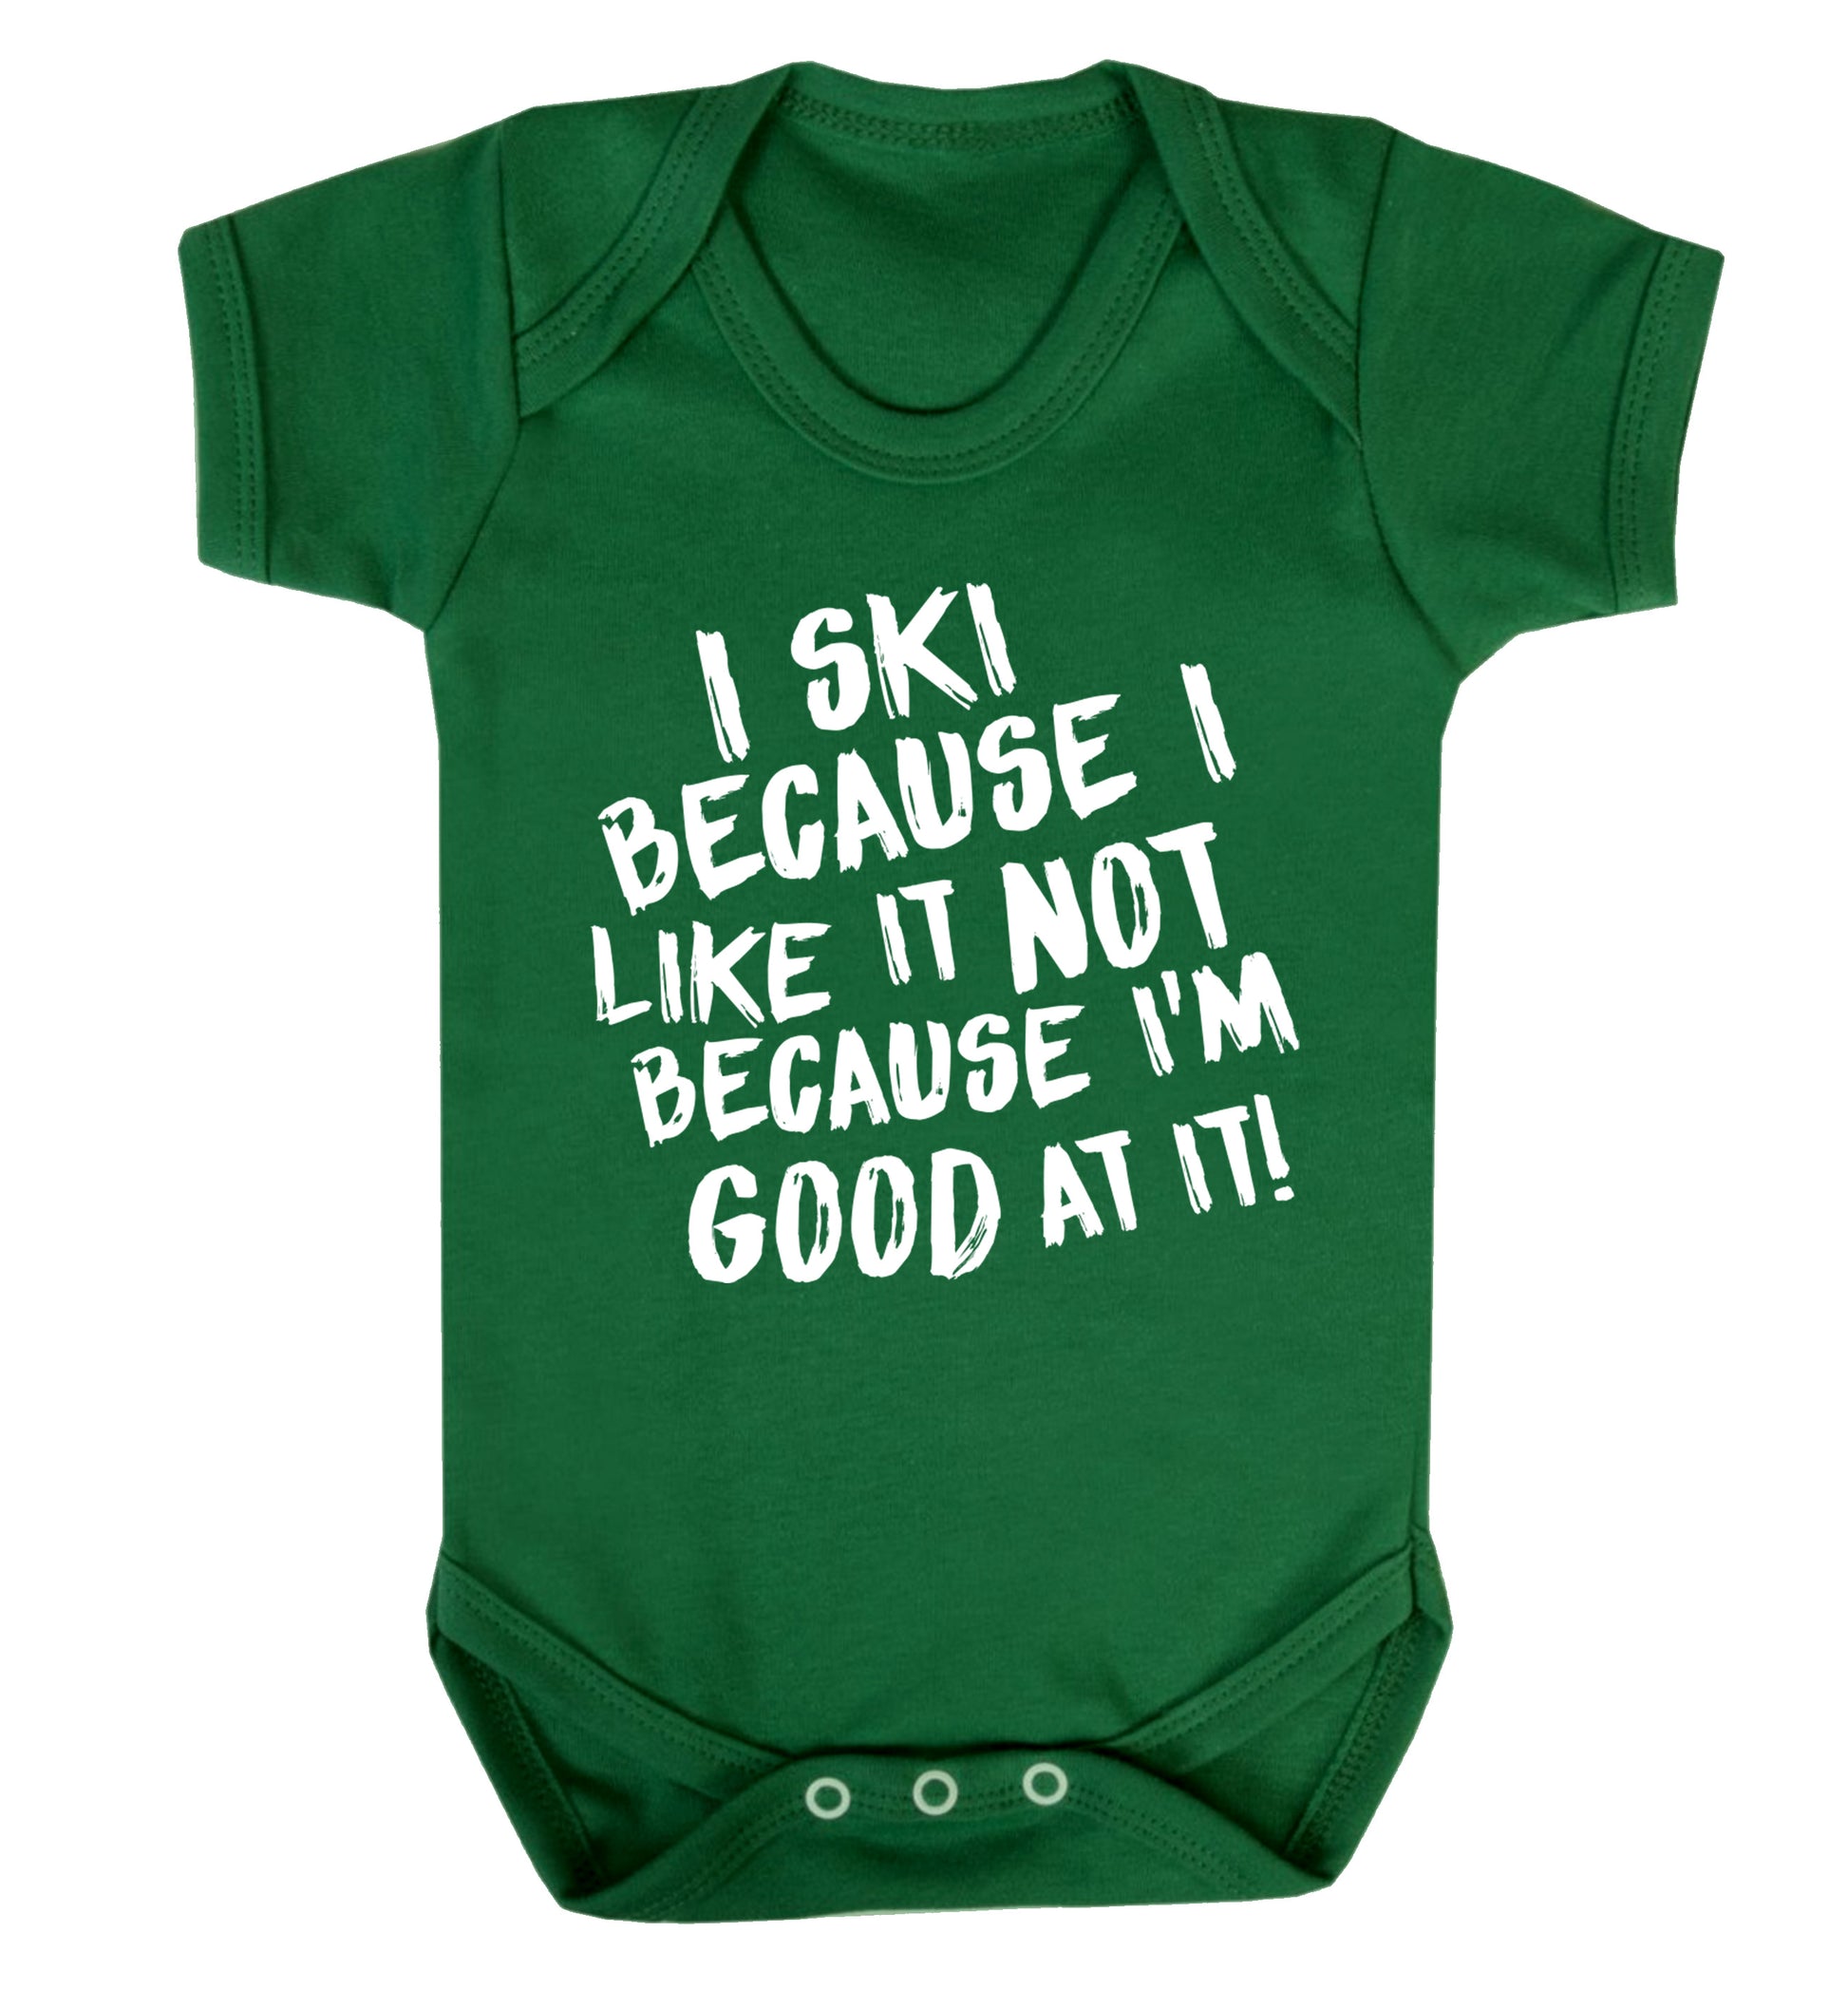 I ski because I like it not because I'm good at it Baby Vest green 18-24 months